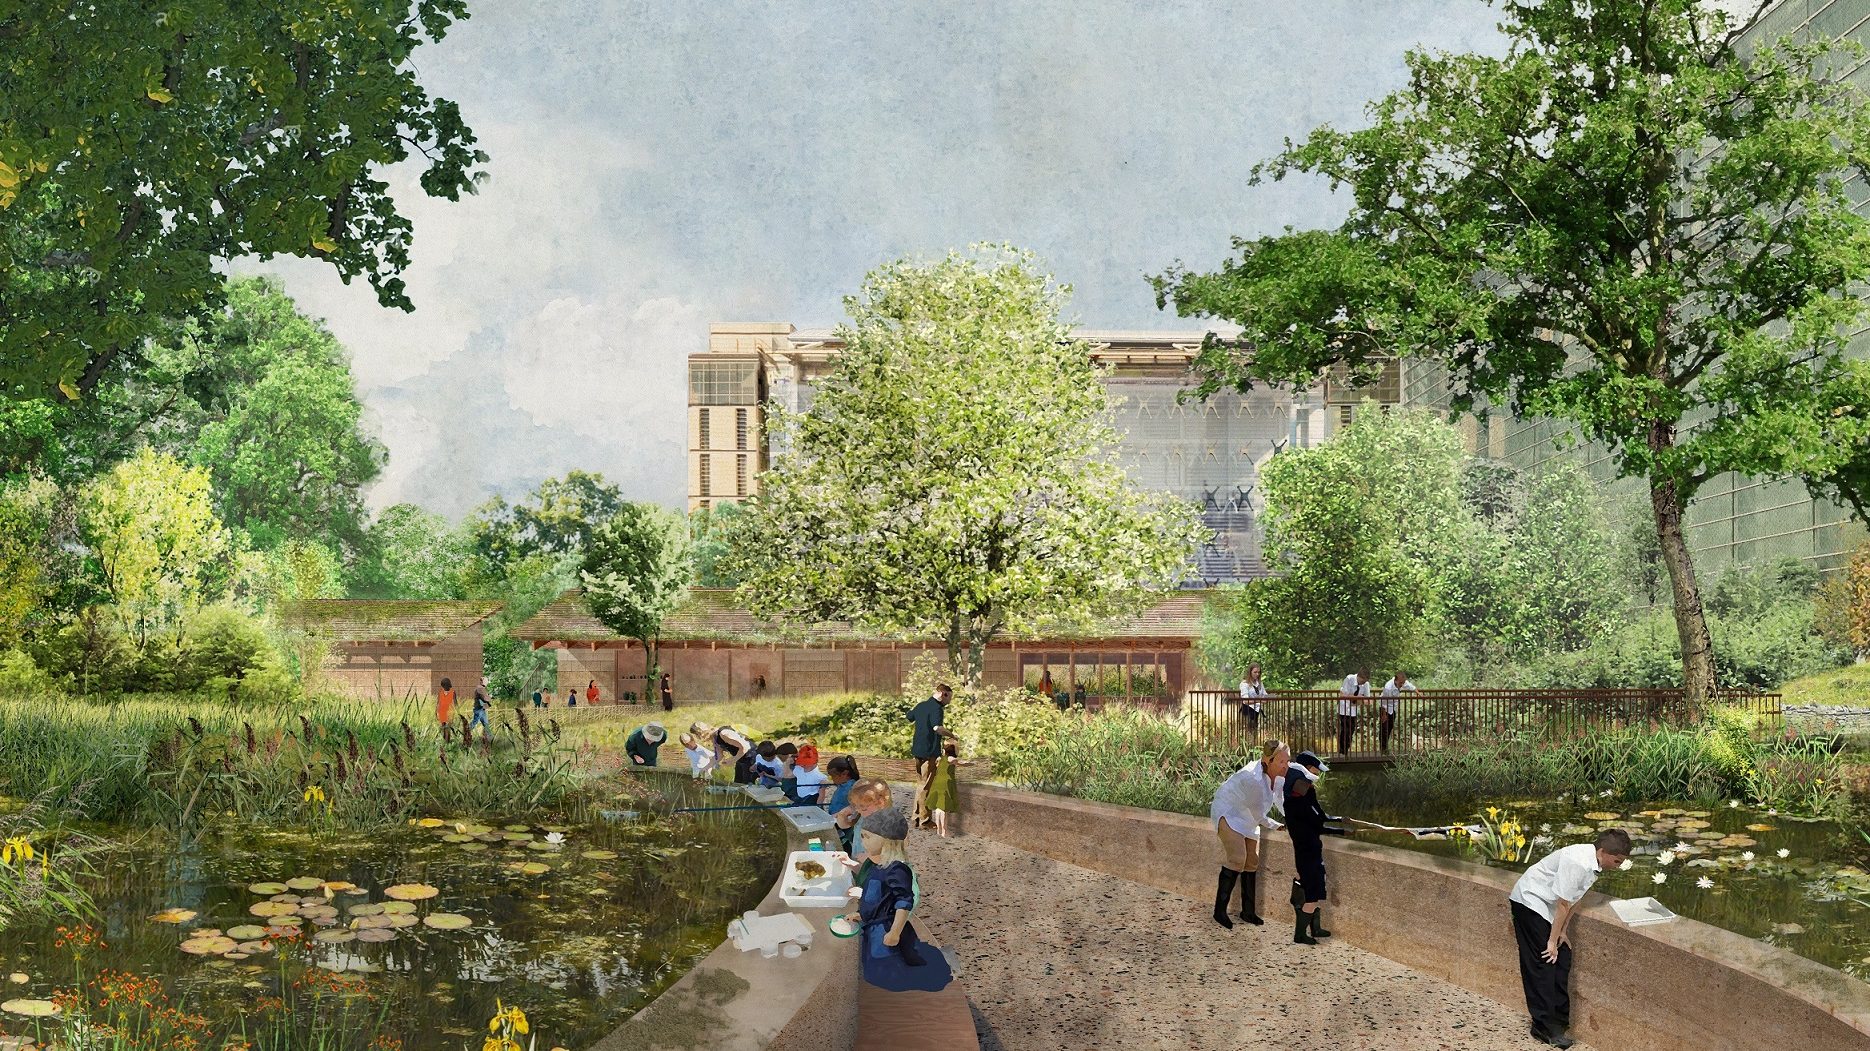 Artist visualisation of the new urban garden, which is due to open in 2023